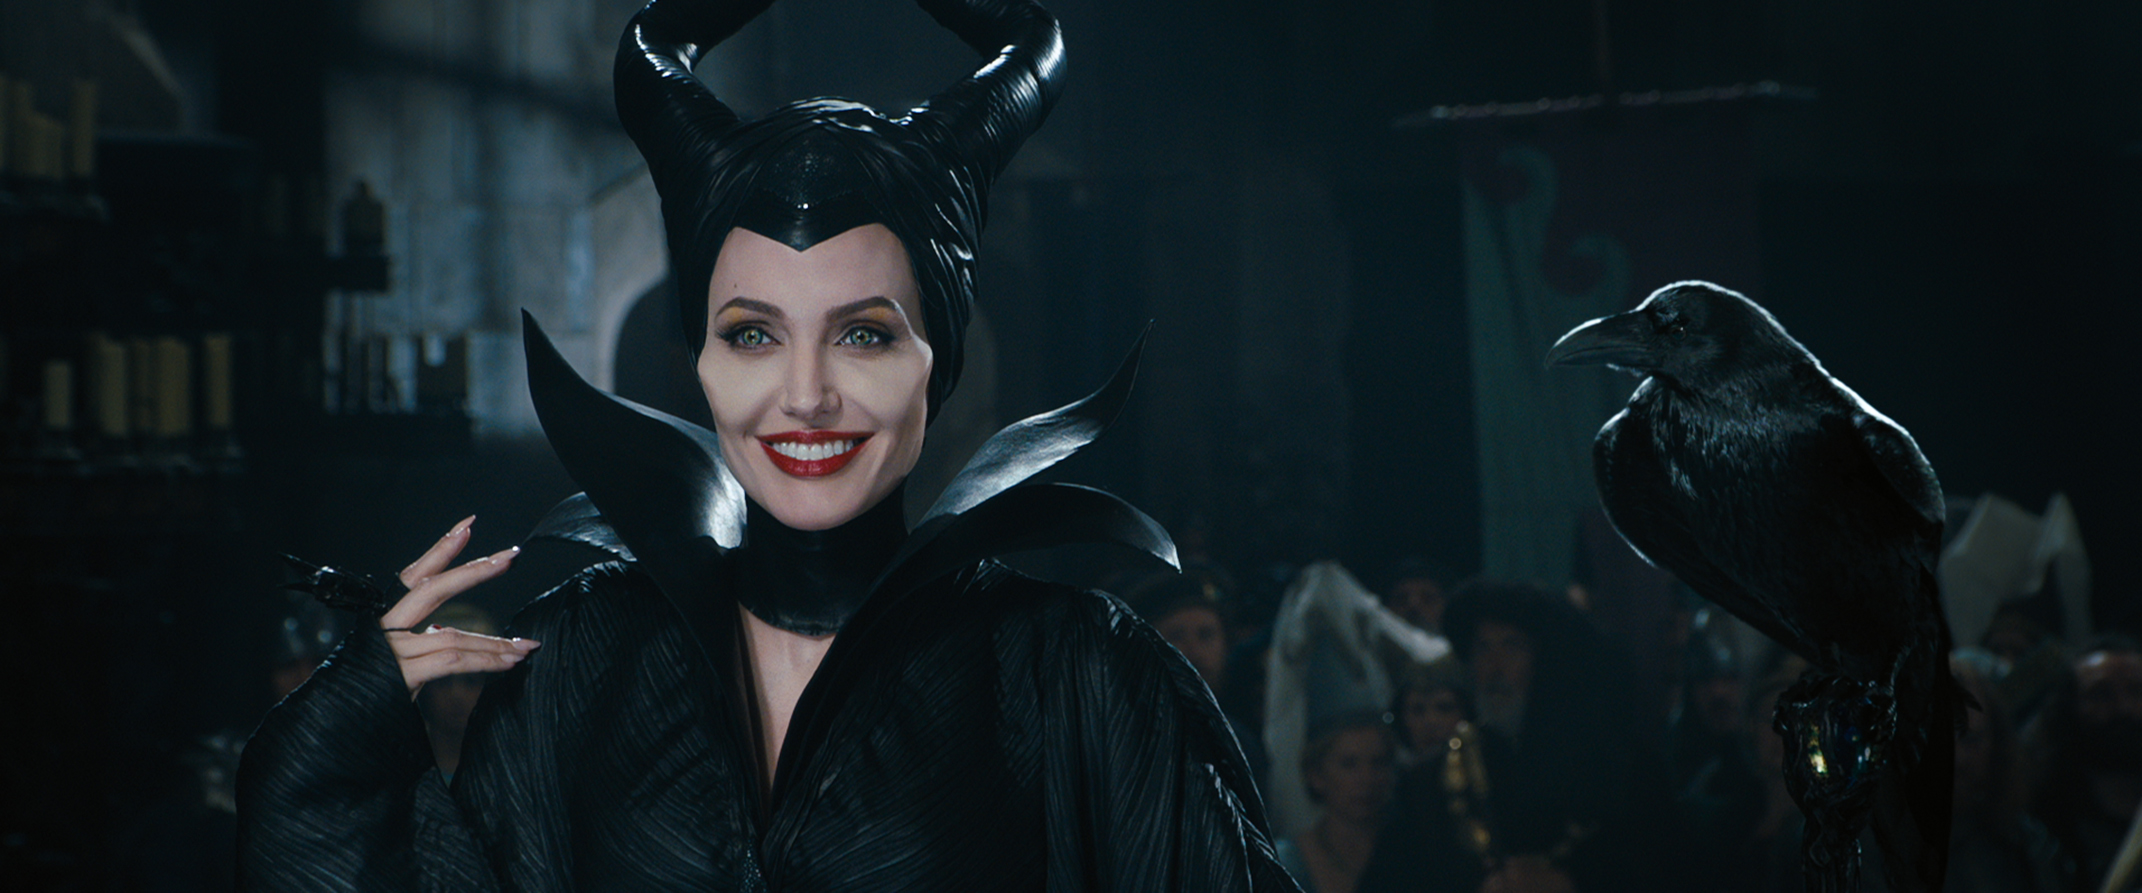 7 Movies Like Maleficent You Must See